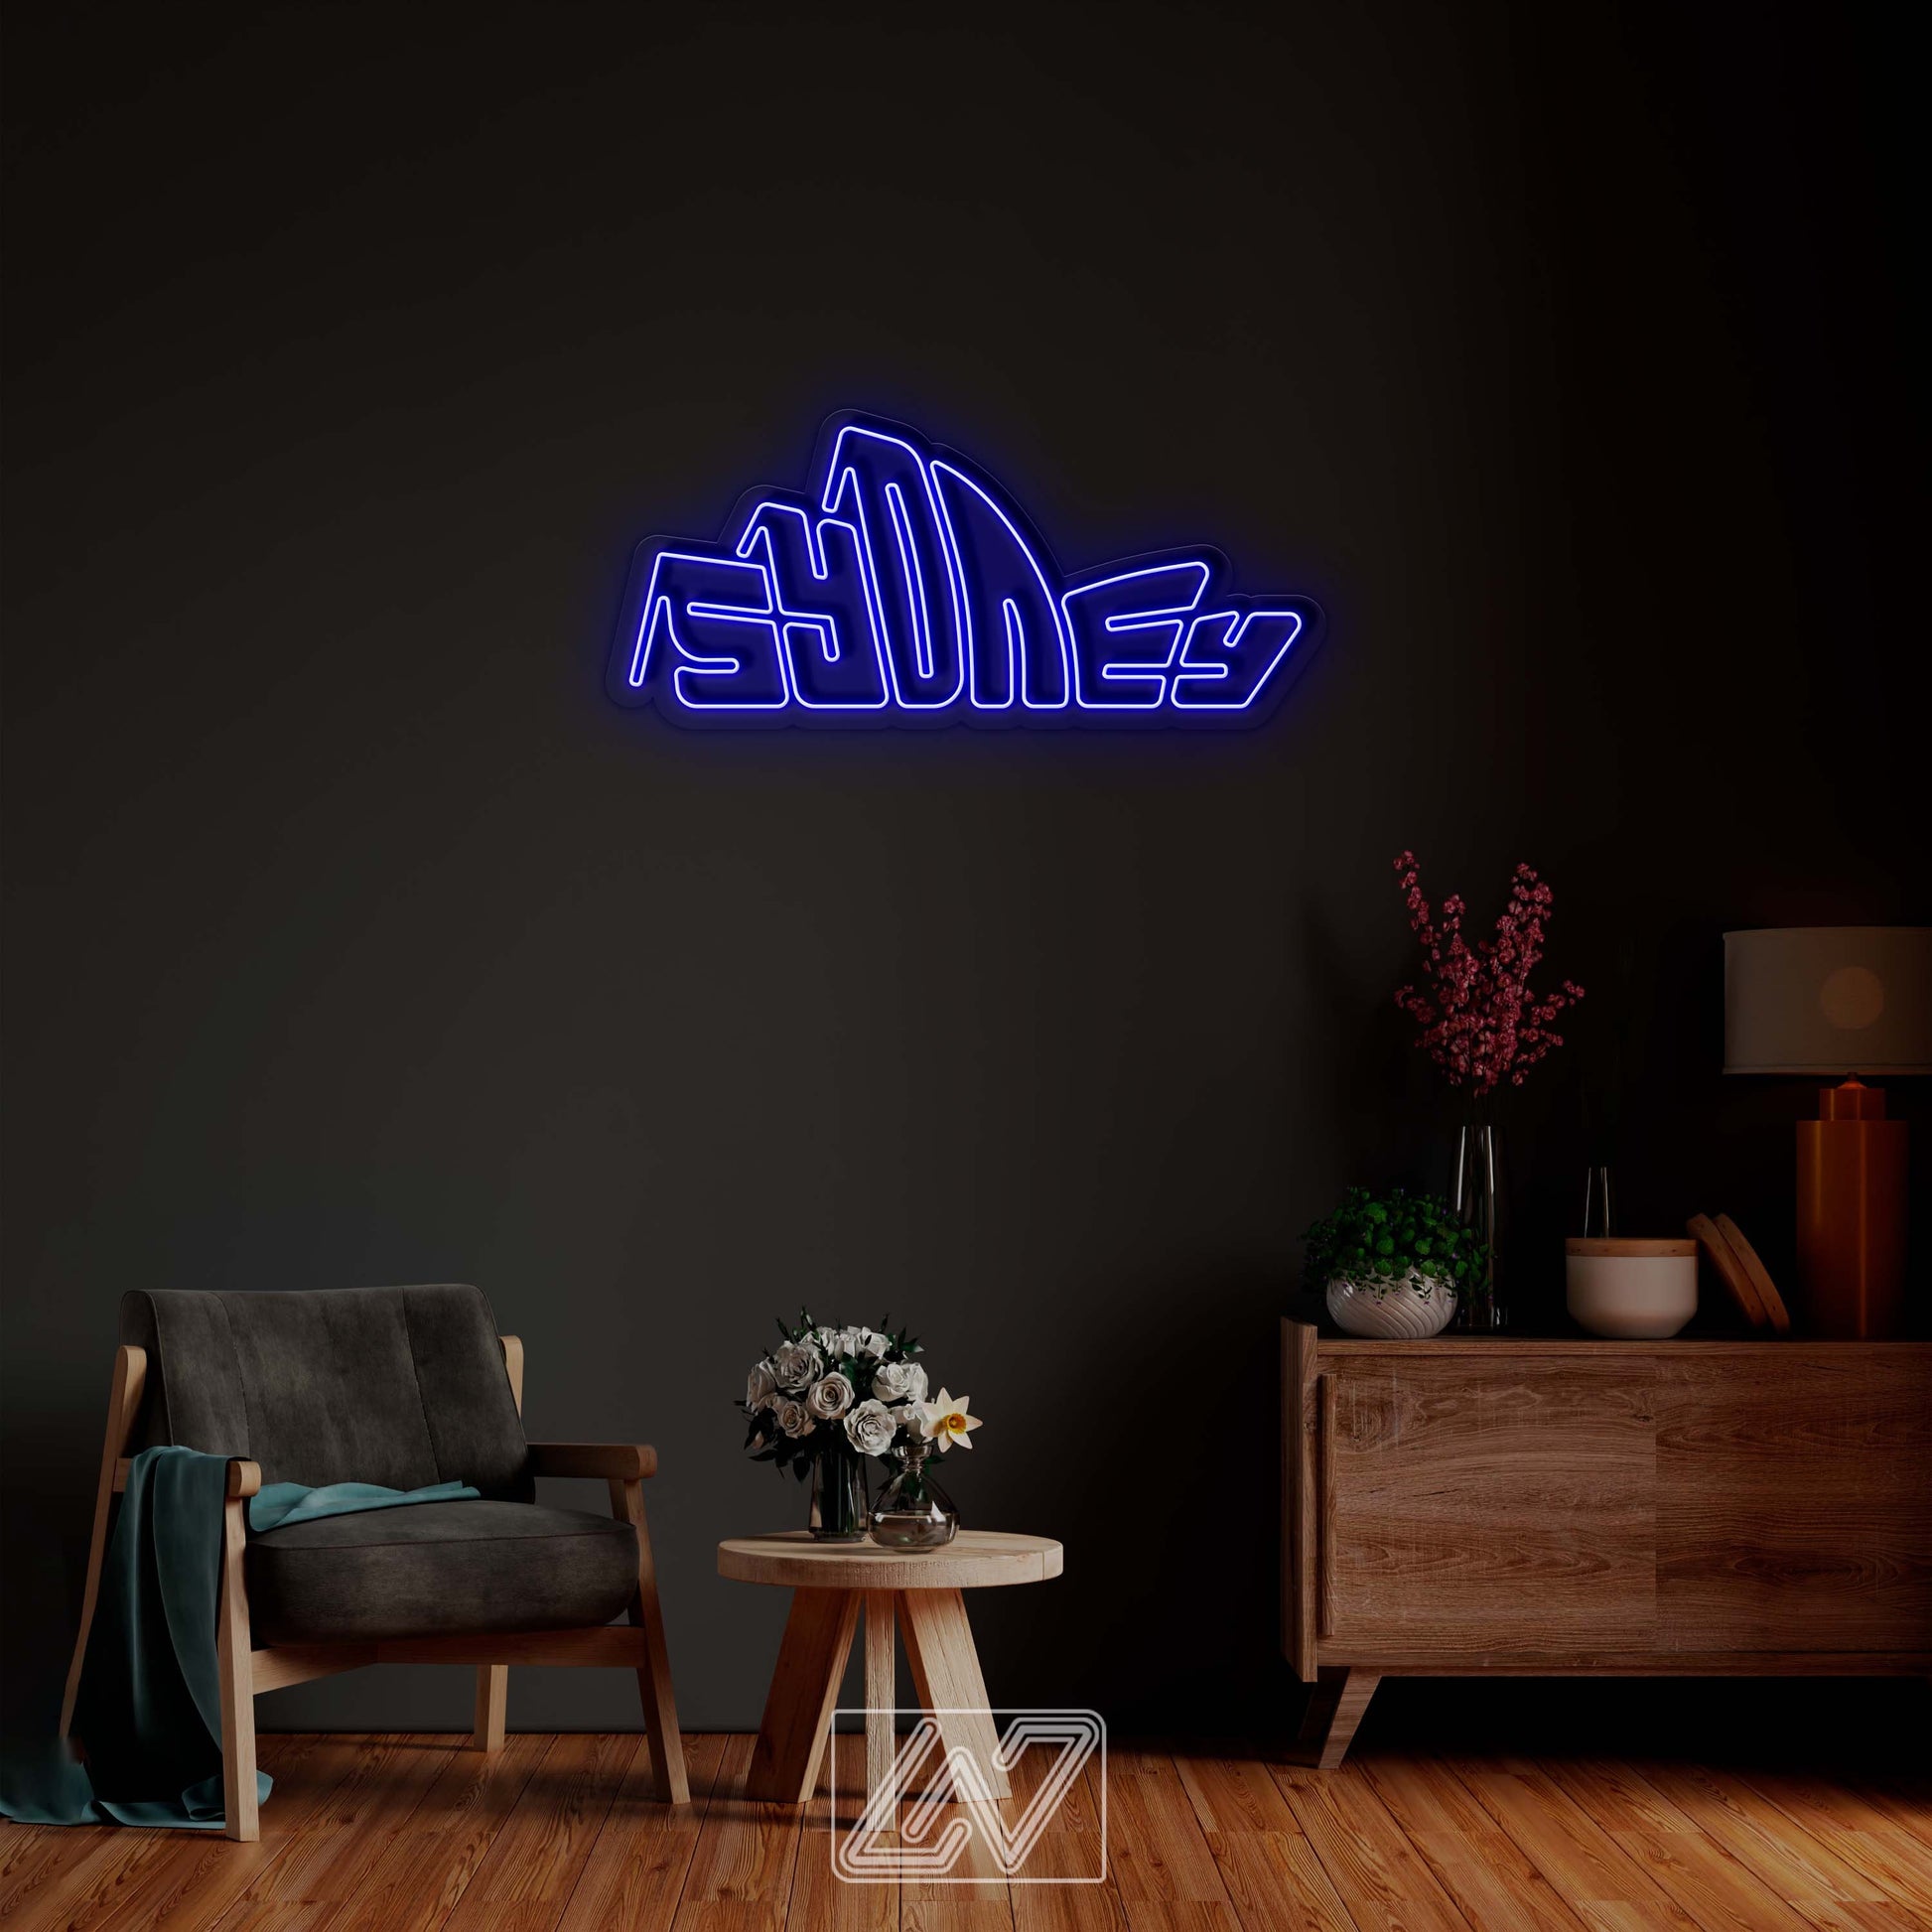 Sydney - LED Neon Sign, City Neon Sign, Neon Sign Bedroom, Neon Sign Art, Neon Sign Bar, Neon Light, Led Neon Sign